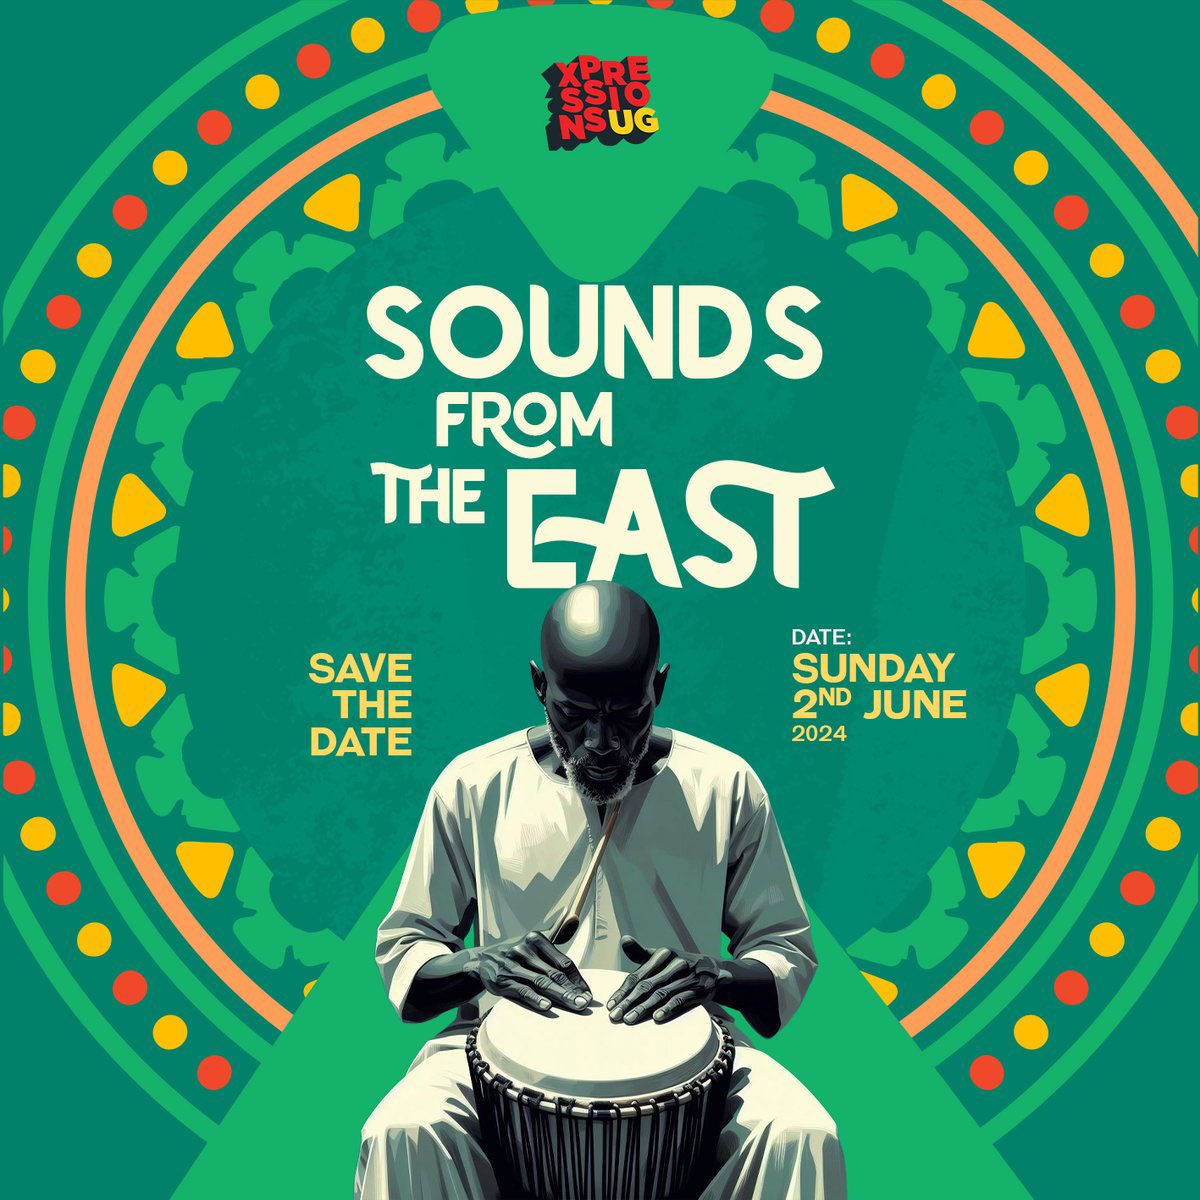 📌SOUNDS FROM THE EAST 📅SAVE THE DATE 02/06 Get ready to level up your musical experience! While you adore intimate shows, @XpressionsUG is cranking it up a notch for an unforgettable journey through music like you've never witnessed before! 🎶🚀